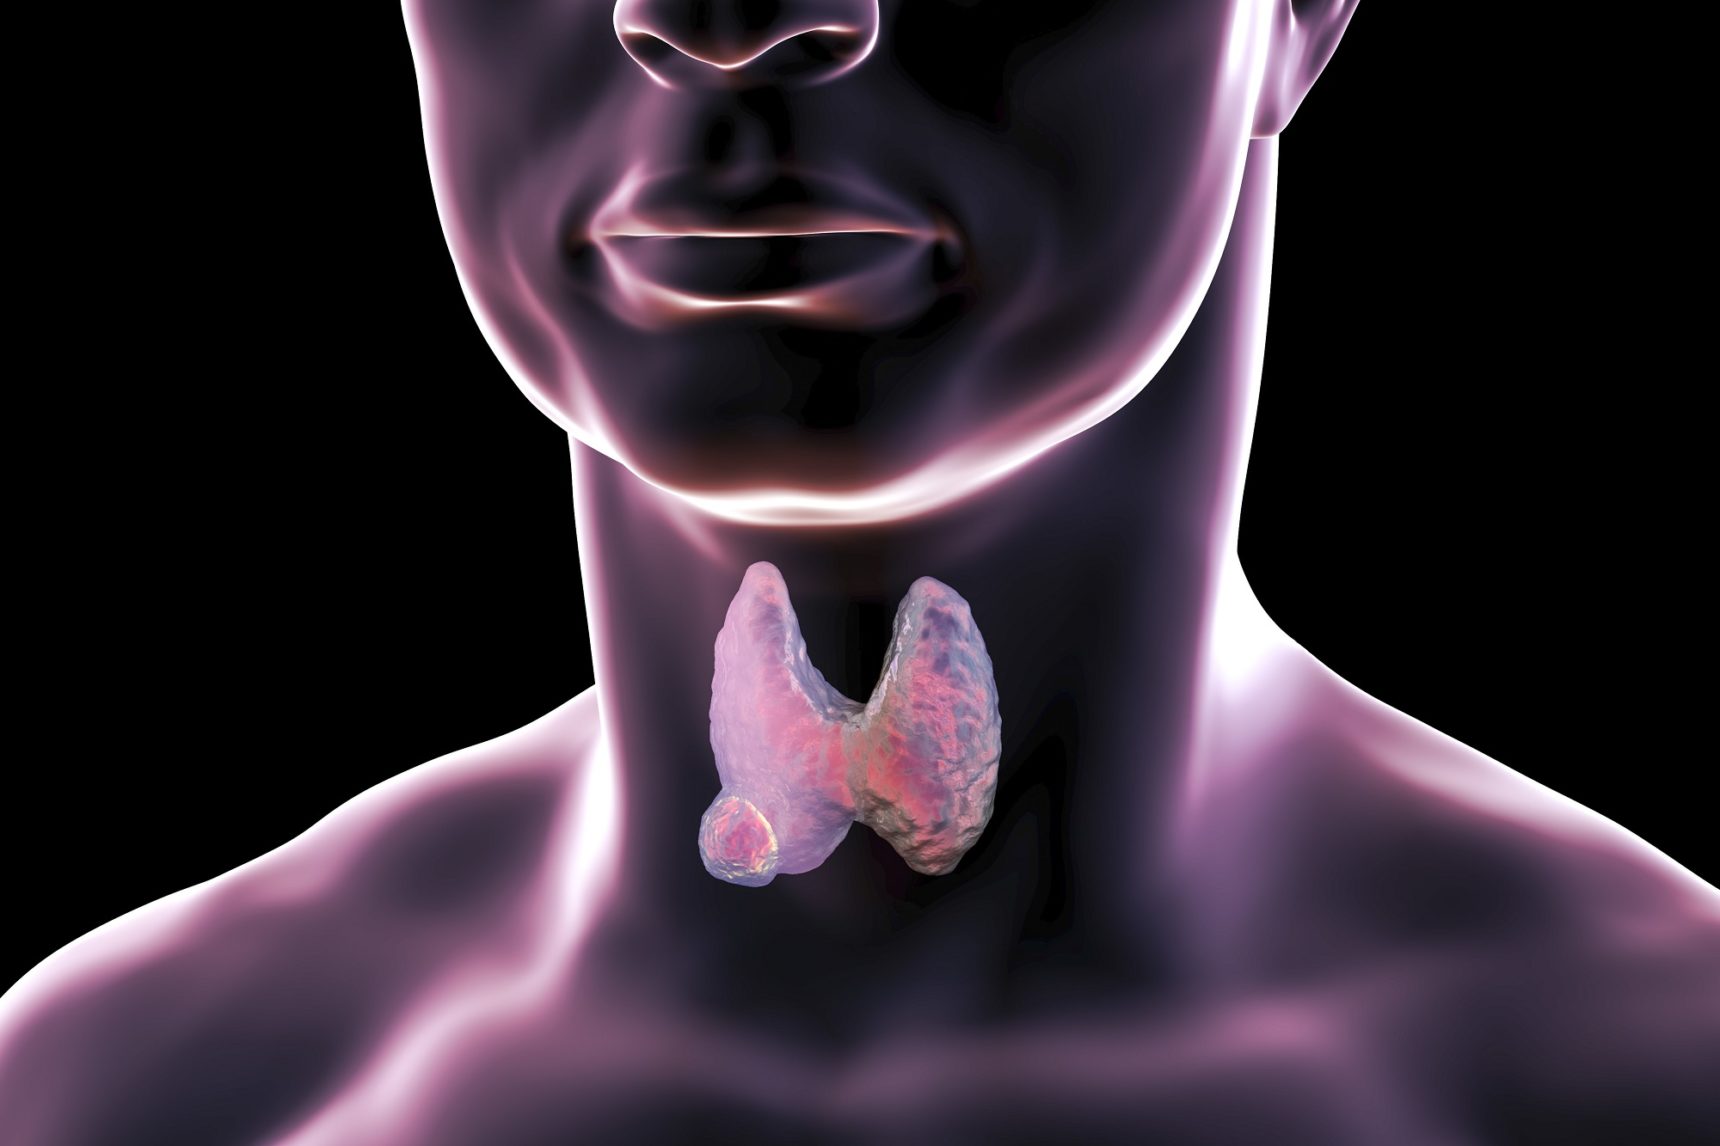 Thyroid cancer: what is the danger and how is it treated?